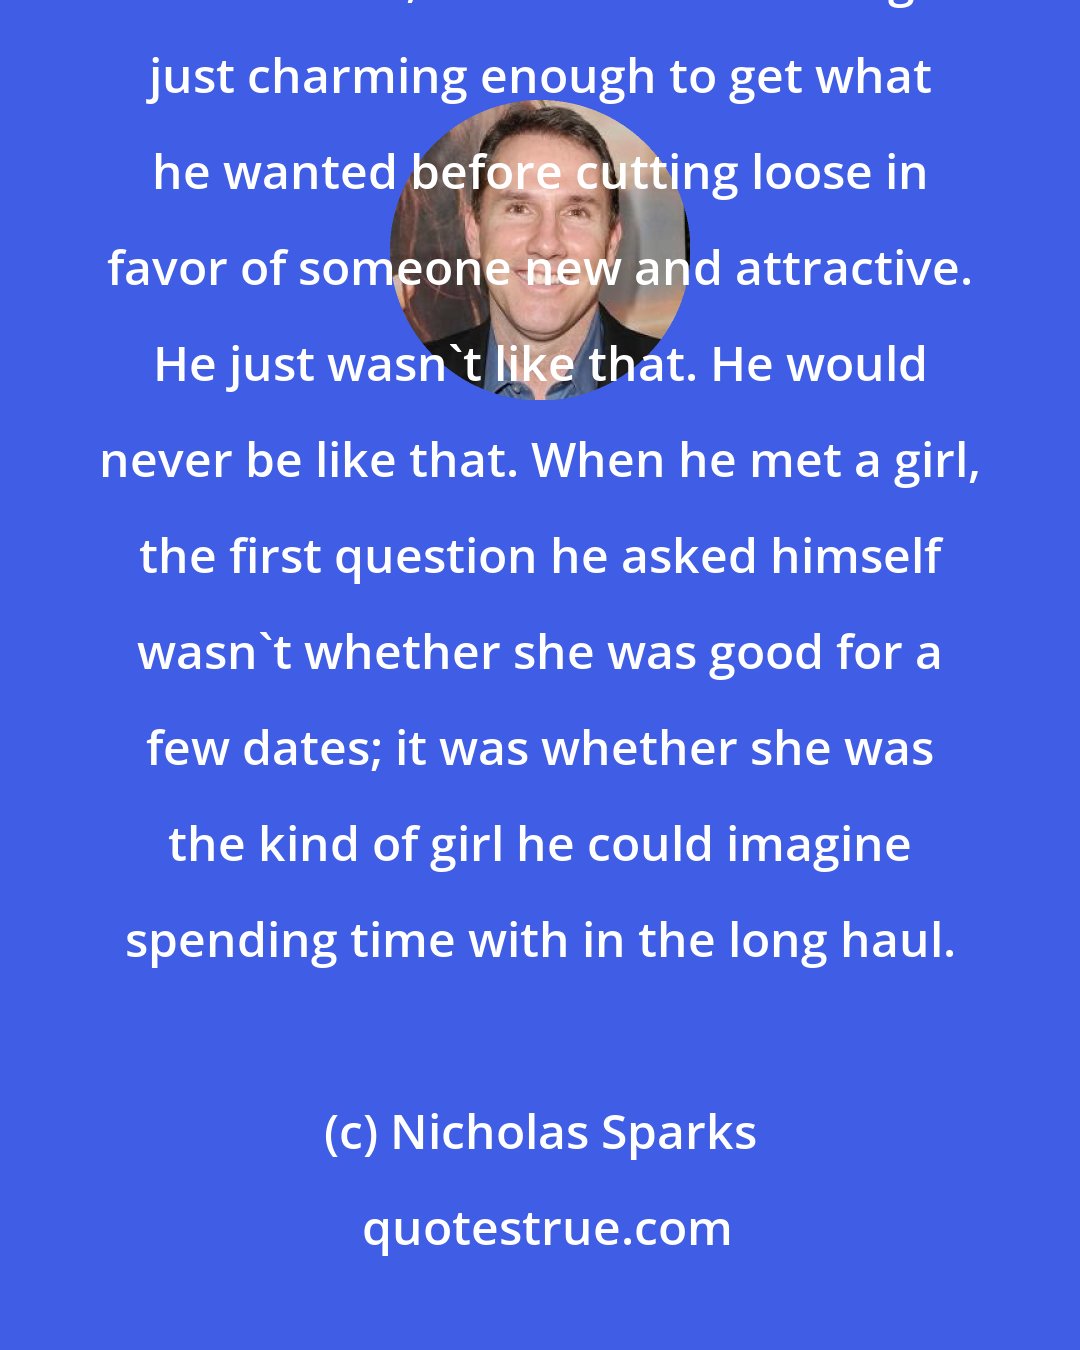 Nicholas Sparks: He wasn't into one-night stands, he wasn't into scoring just to see if he could, he wasn't into acting just charming enough to get what he wanted before cutting loose in favor of someone new and attractive. He just wasn't like that. He would never be like that. When he met a girl, the first question he asked himself wasn't whether she was good for a few dates; it was whether she was the kind of girl he could imagine spending time with in the long haul.